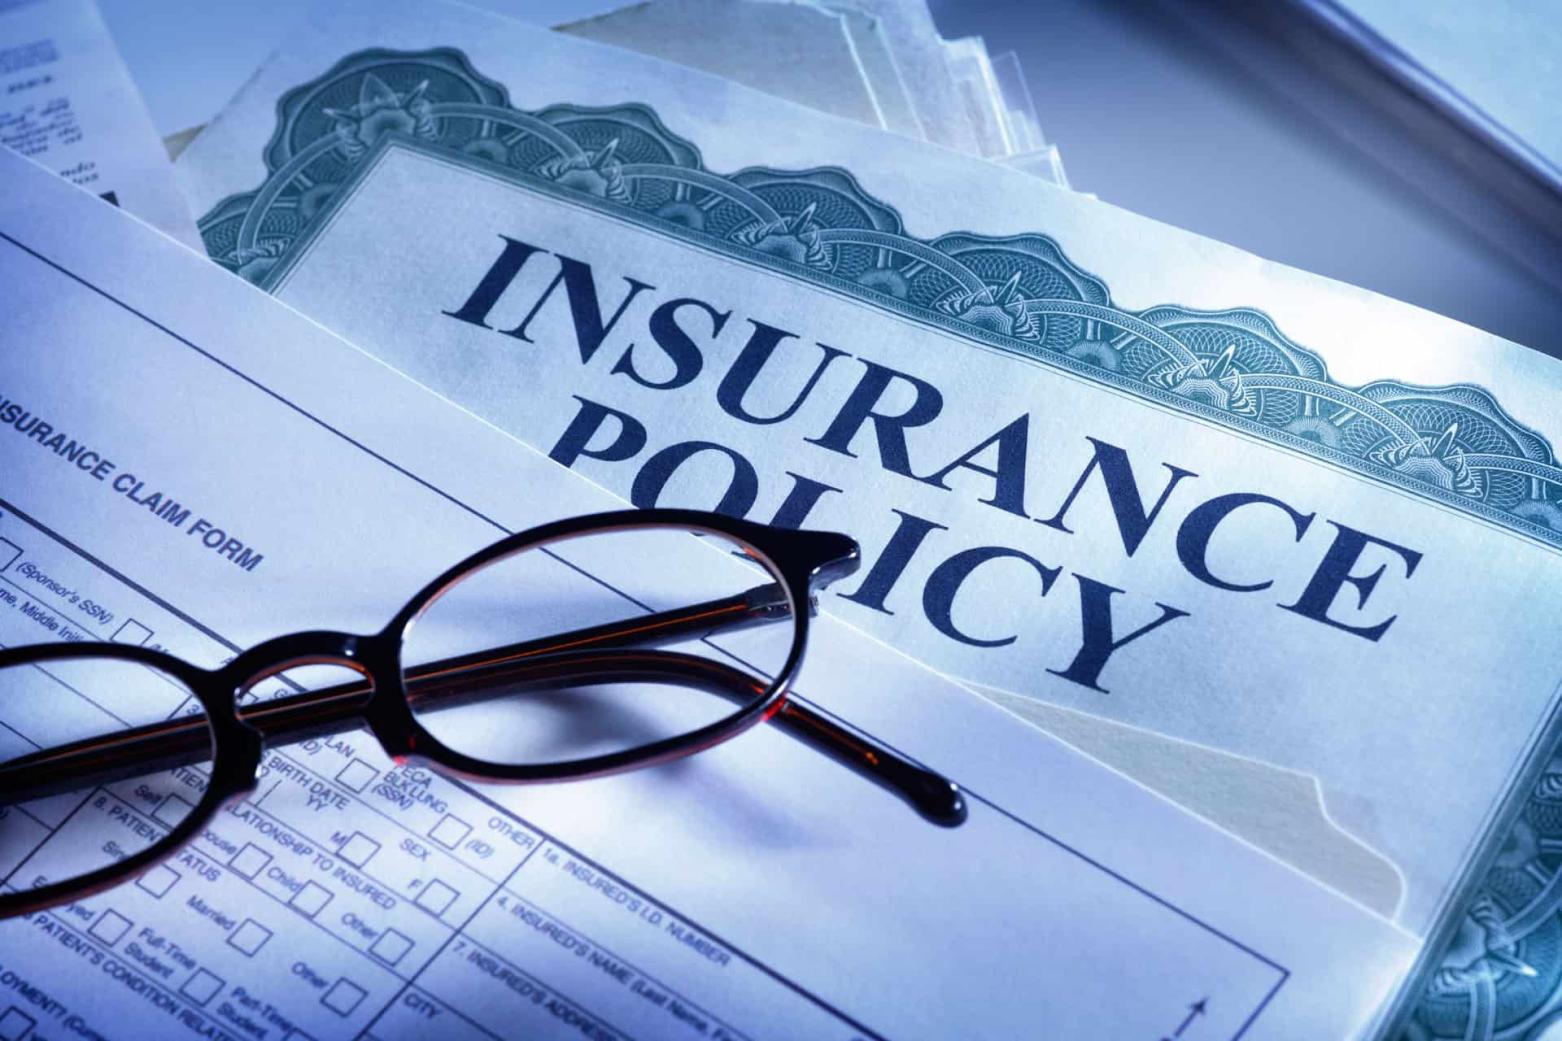 How Can I Ensure That My Business Liability Insurance Policy Is Up-to-Date?